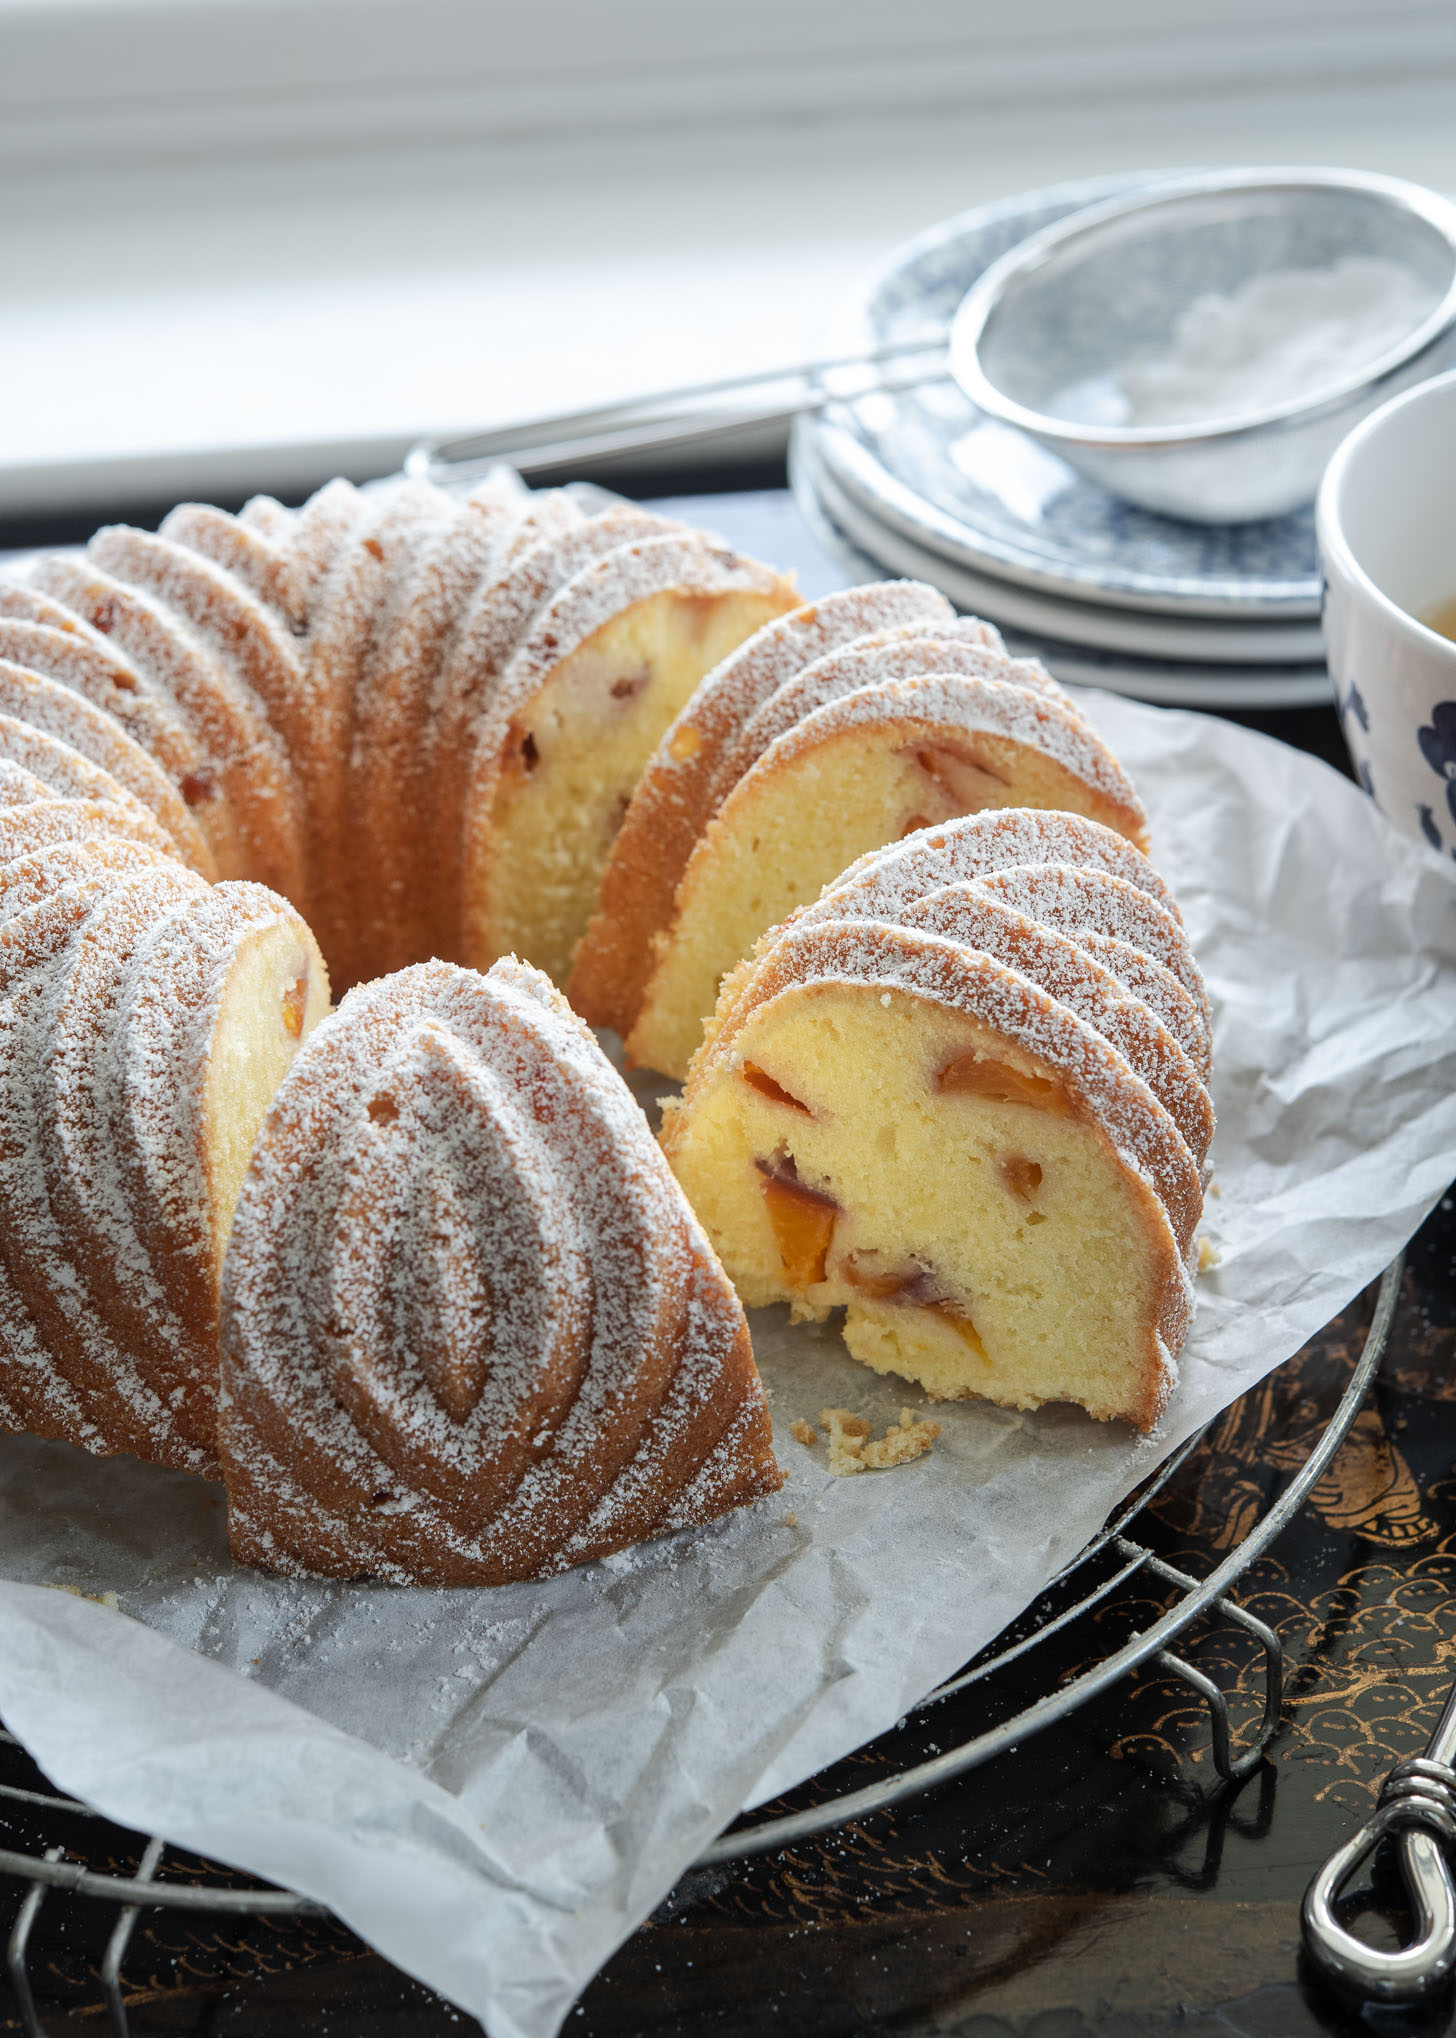 A slice of peach pound cake baked in a bundt pan is showing the cake crumb texture with peach pieces inside.